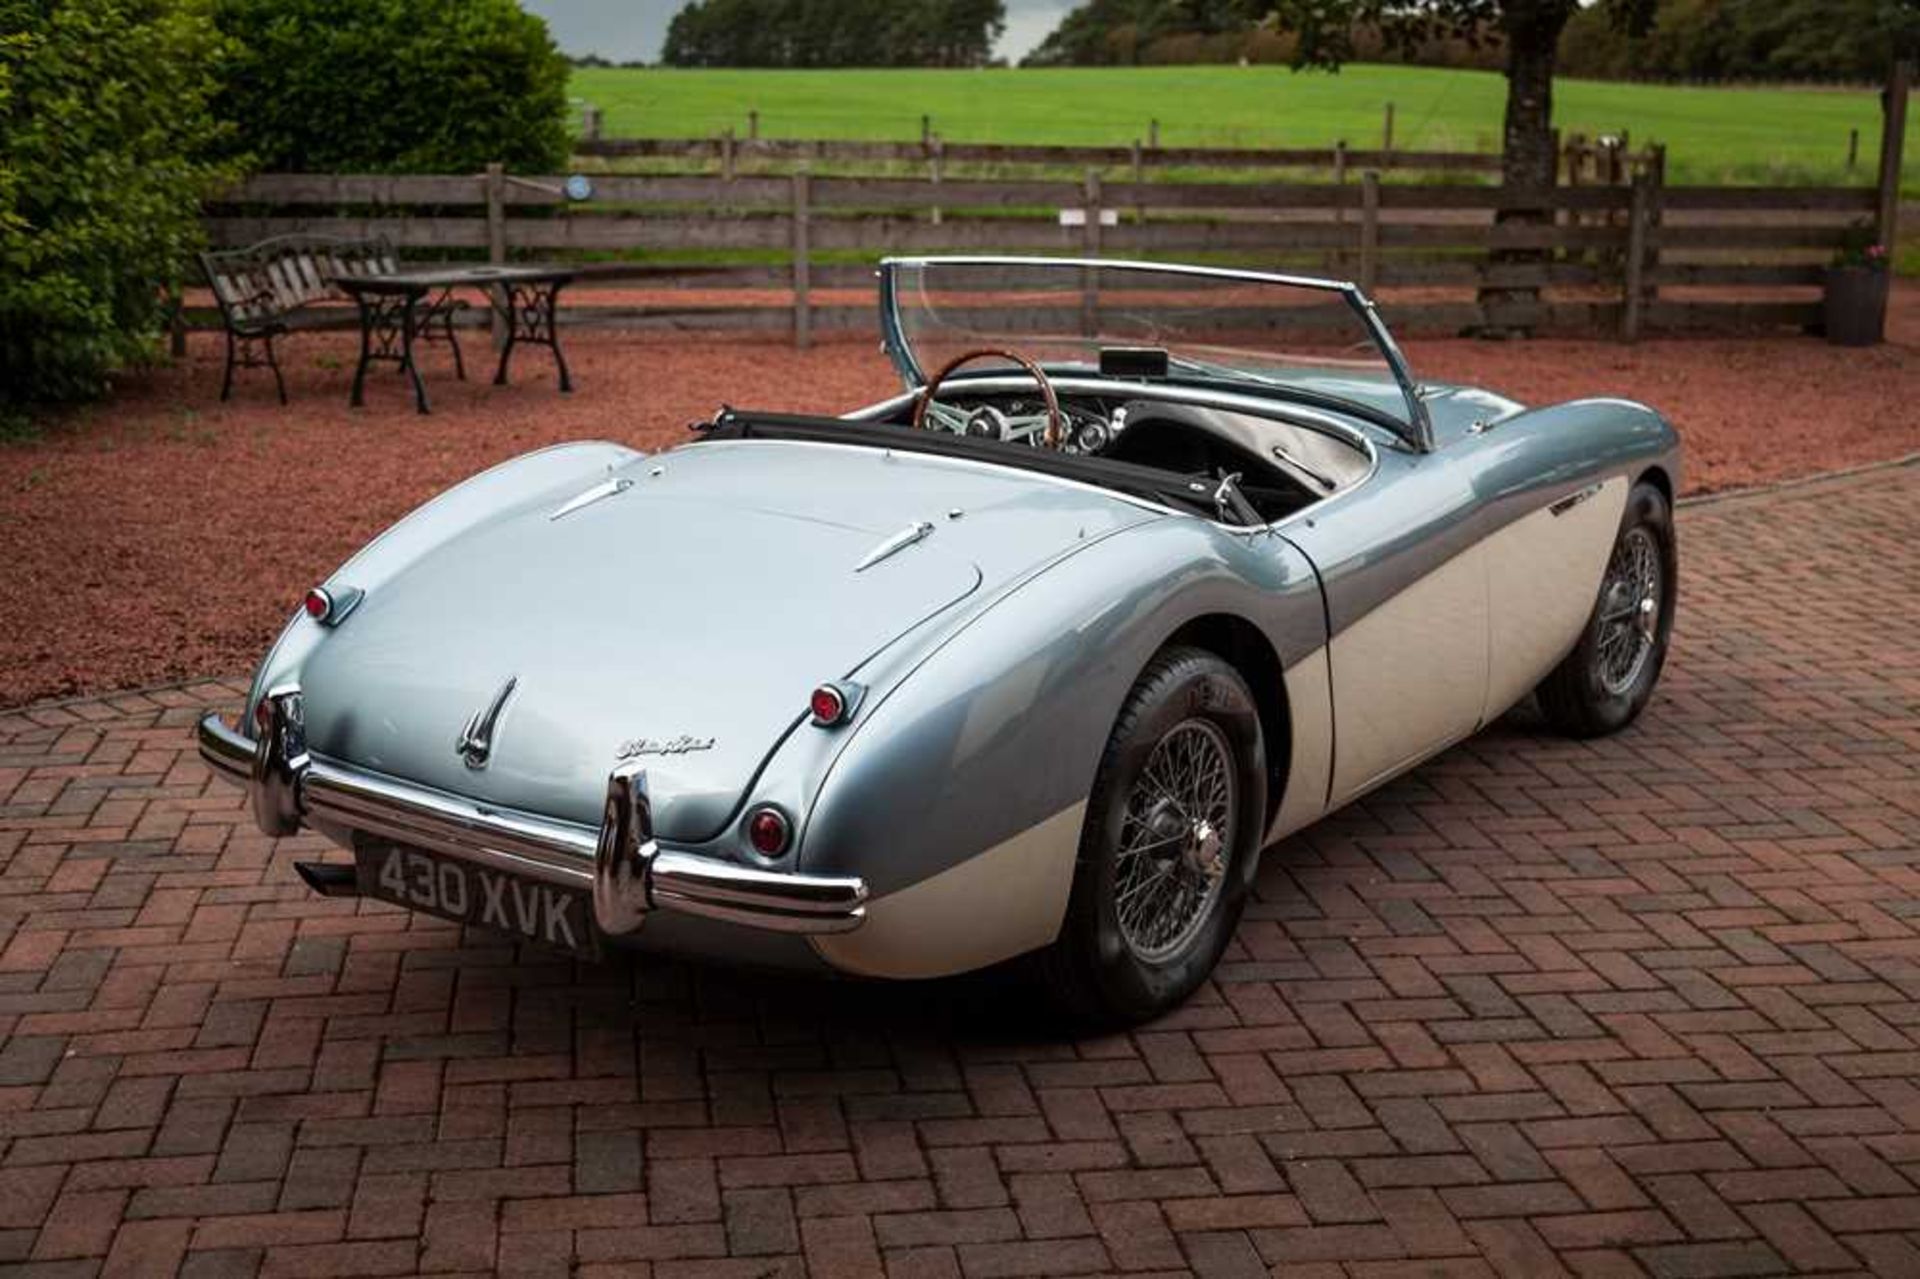 1955 Austin-Healey 100/4 Subtly Upgraded with 5-Speed Transmission and Front Disc Brakes - Image 41 of 54